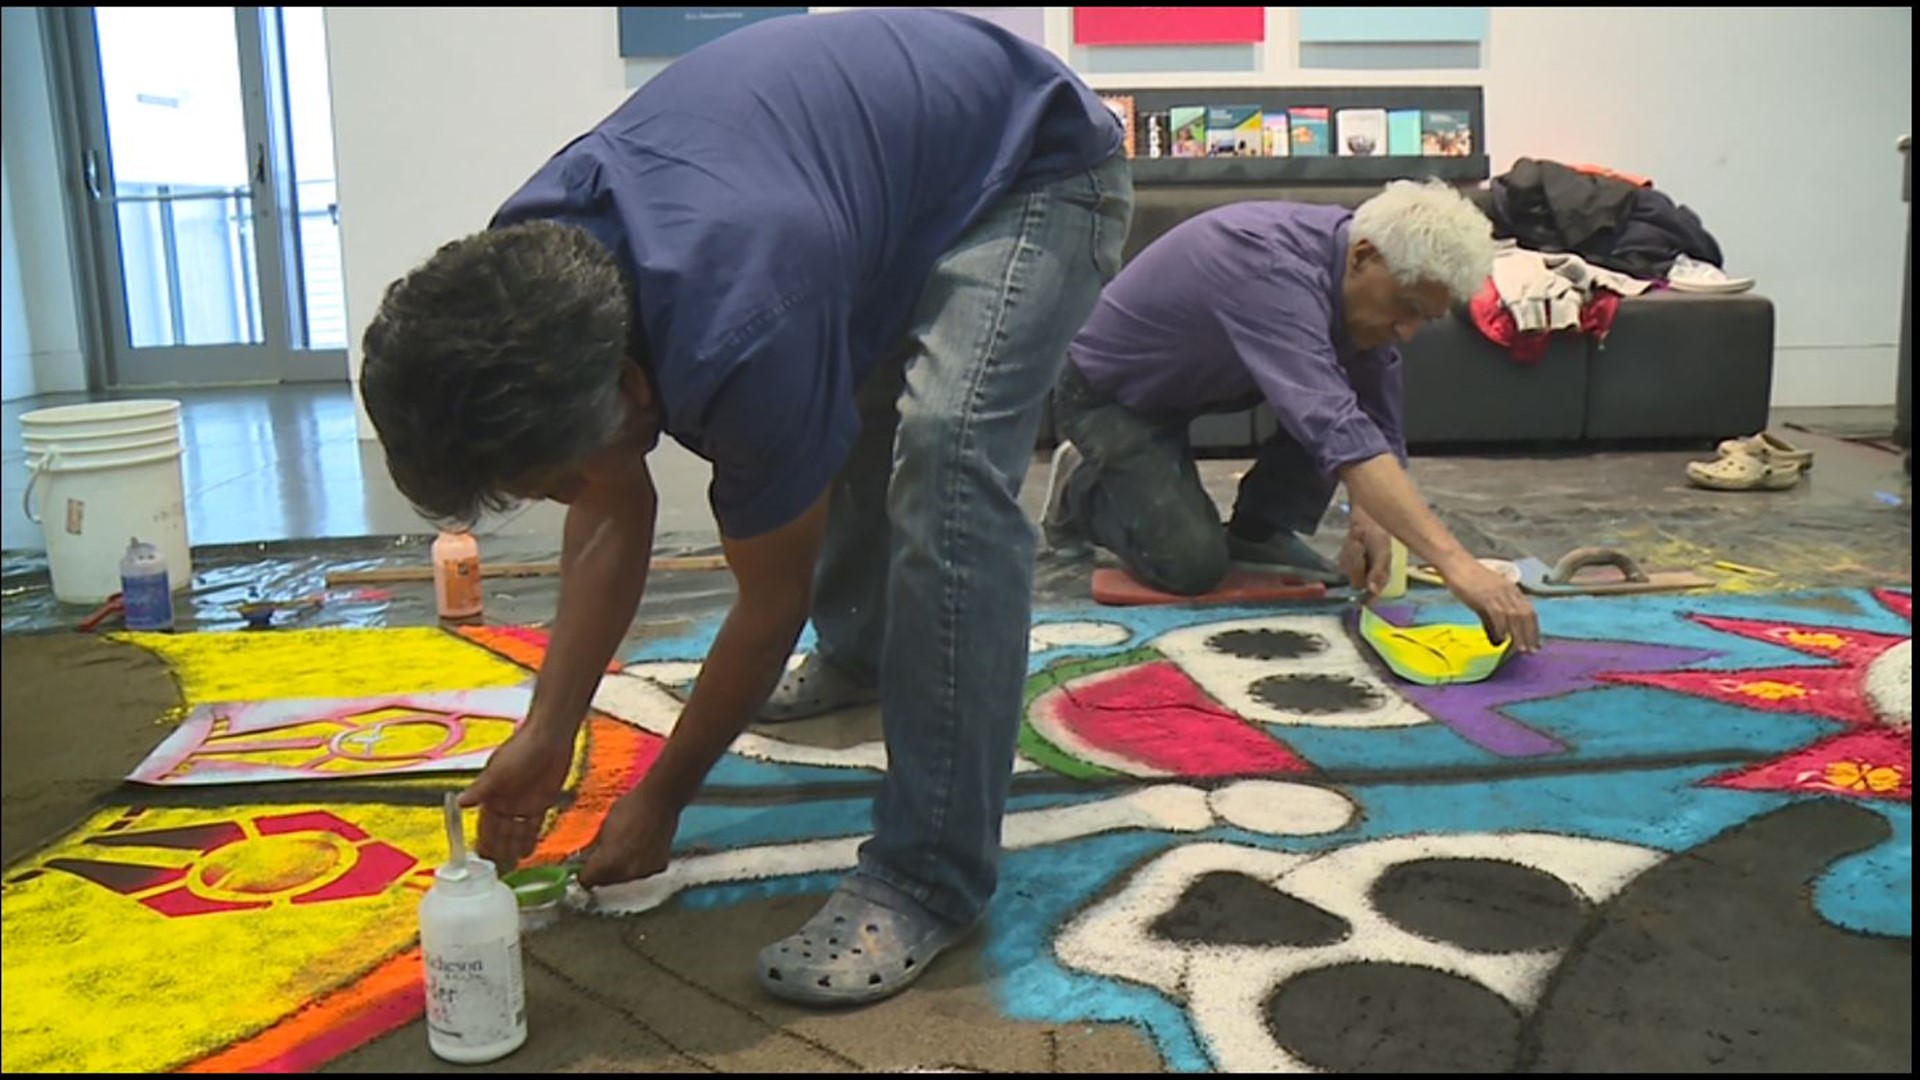 A Seattle sand painter makes a colorful statement about what's happening on the U.S./Mexico border.